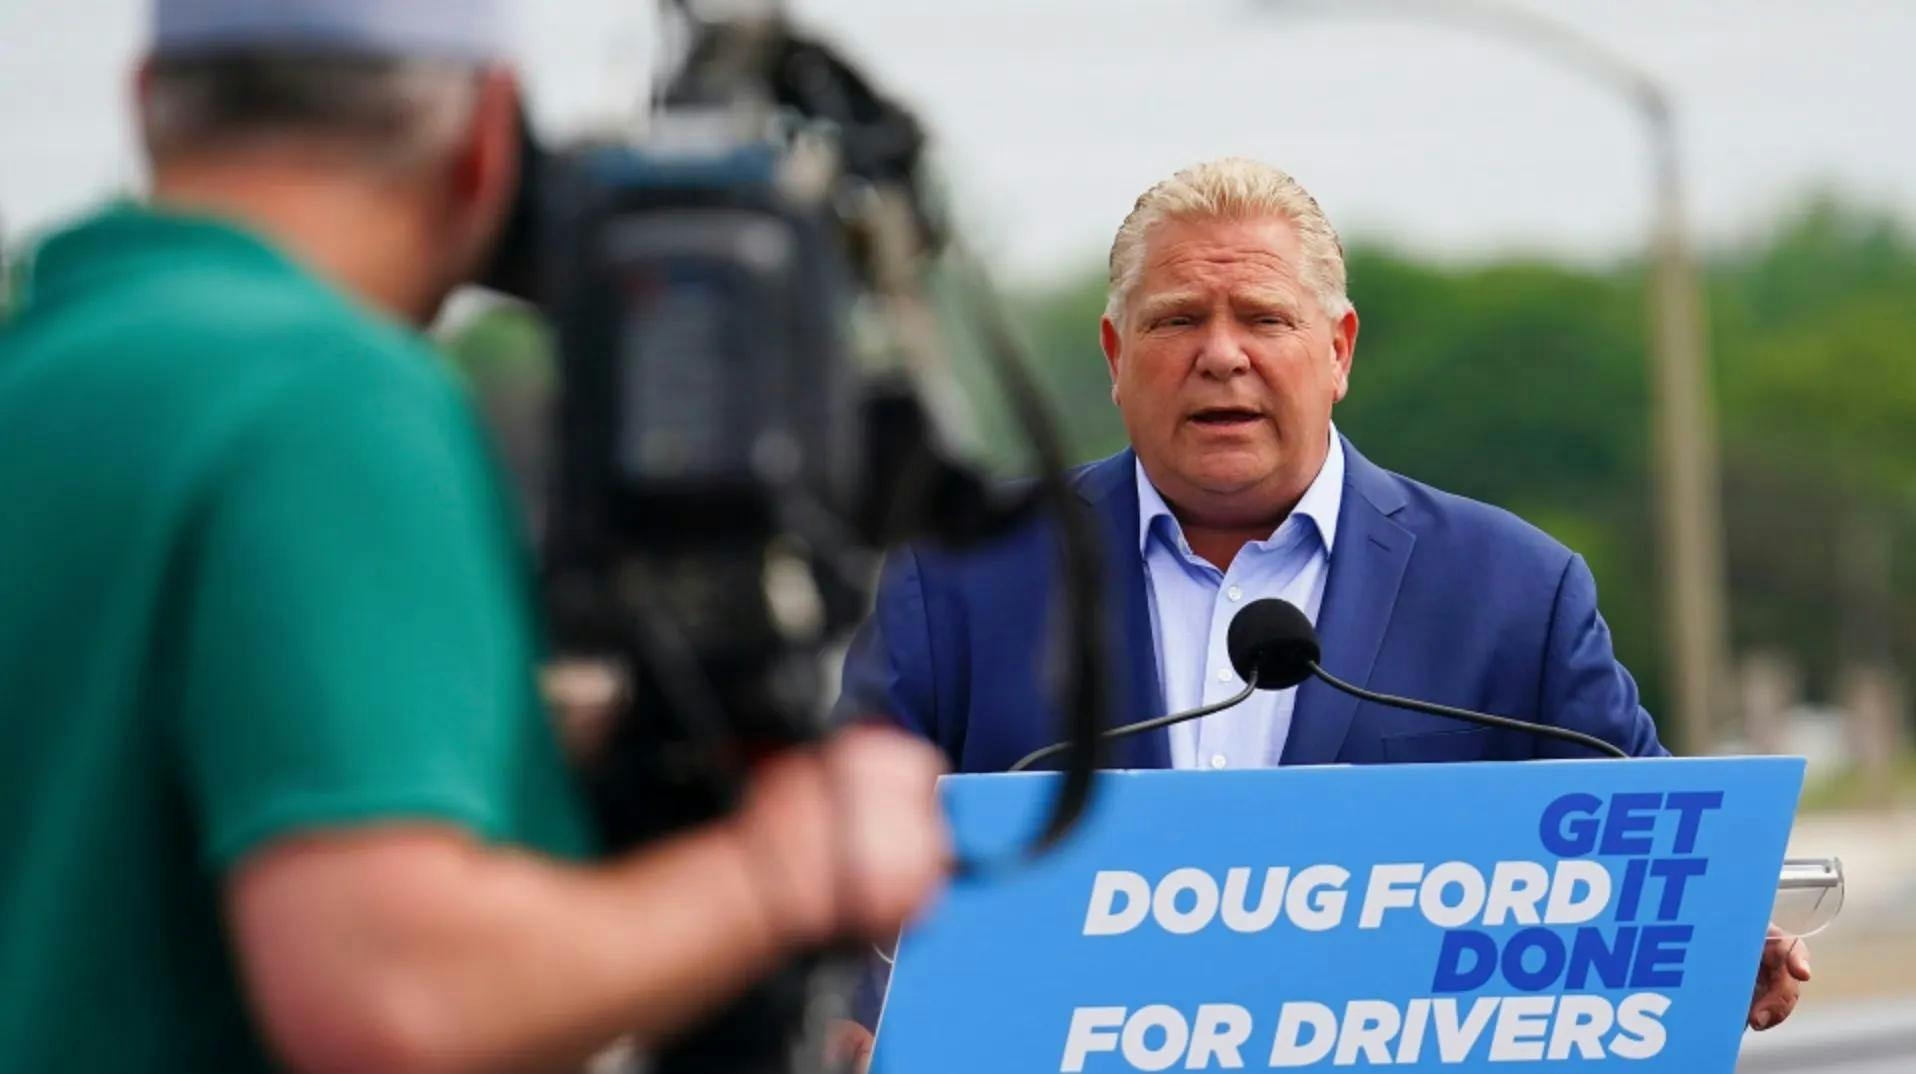 PC convention provides opportunity for Ford camp to refocus on campaign priorities after 'challenging' few months: insiders